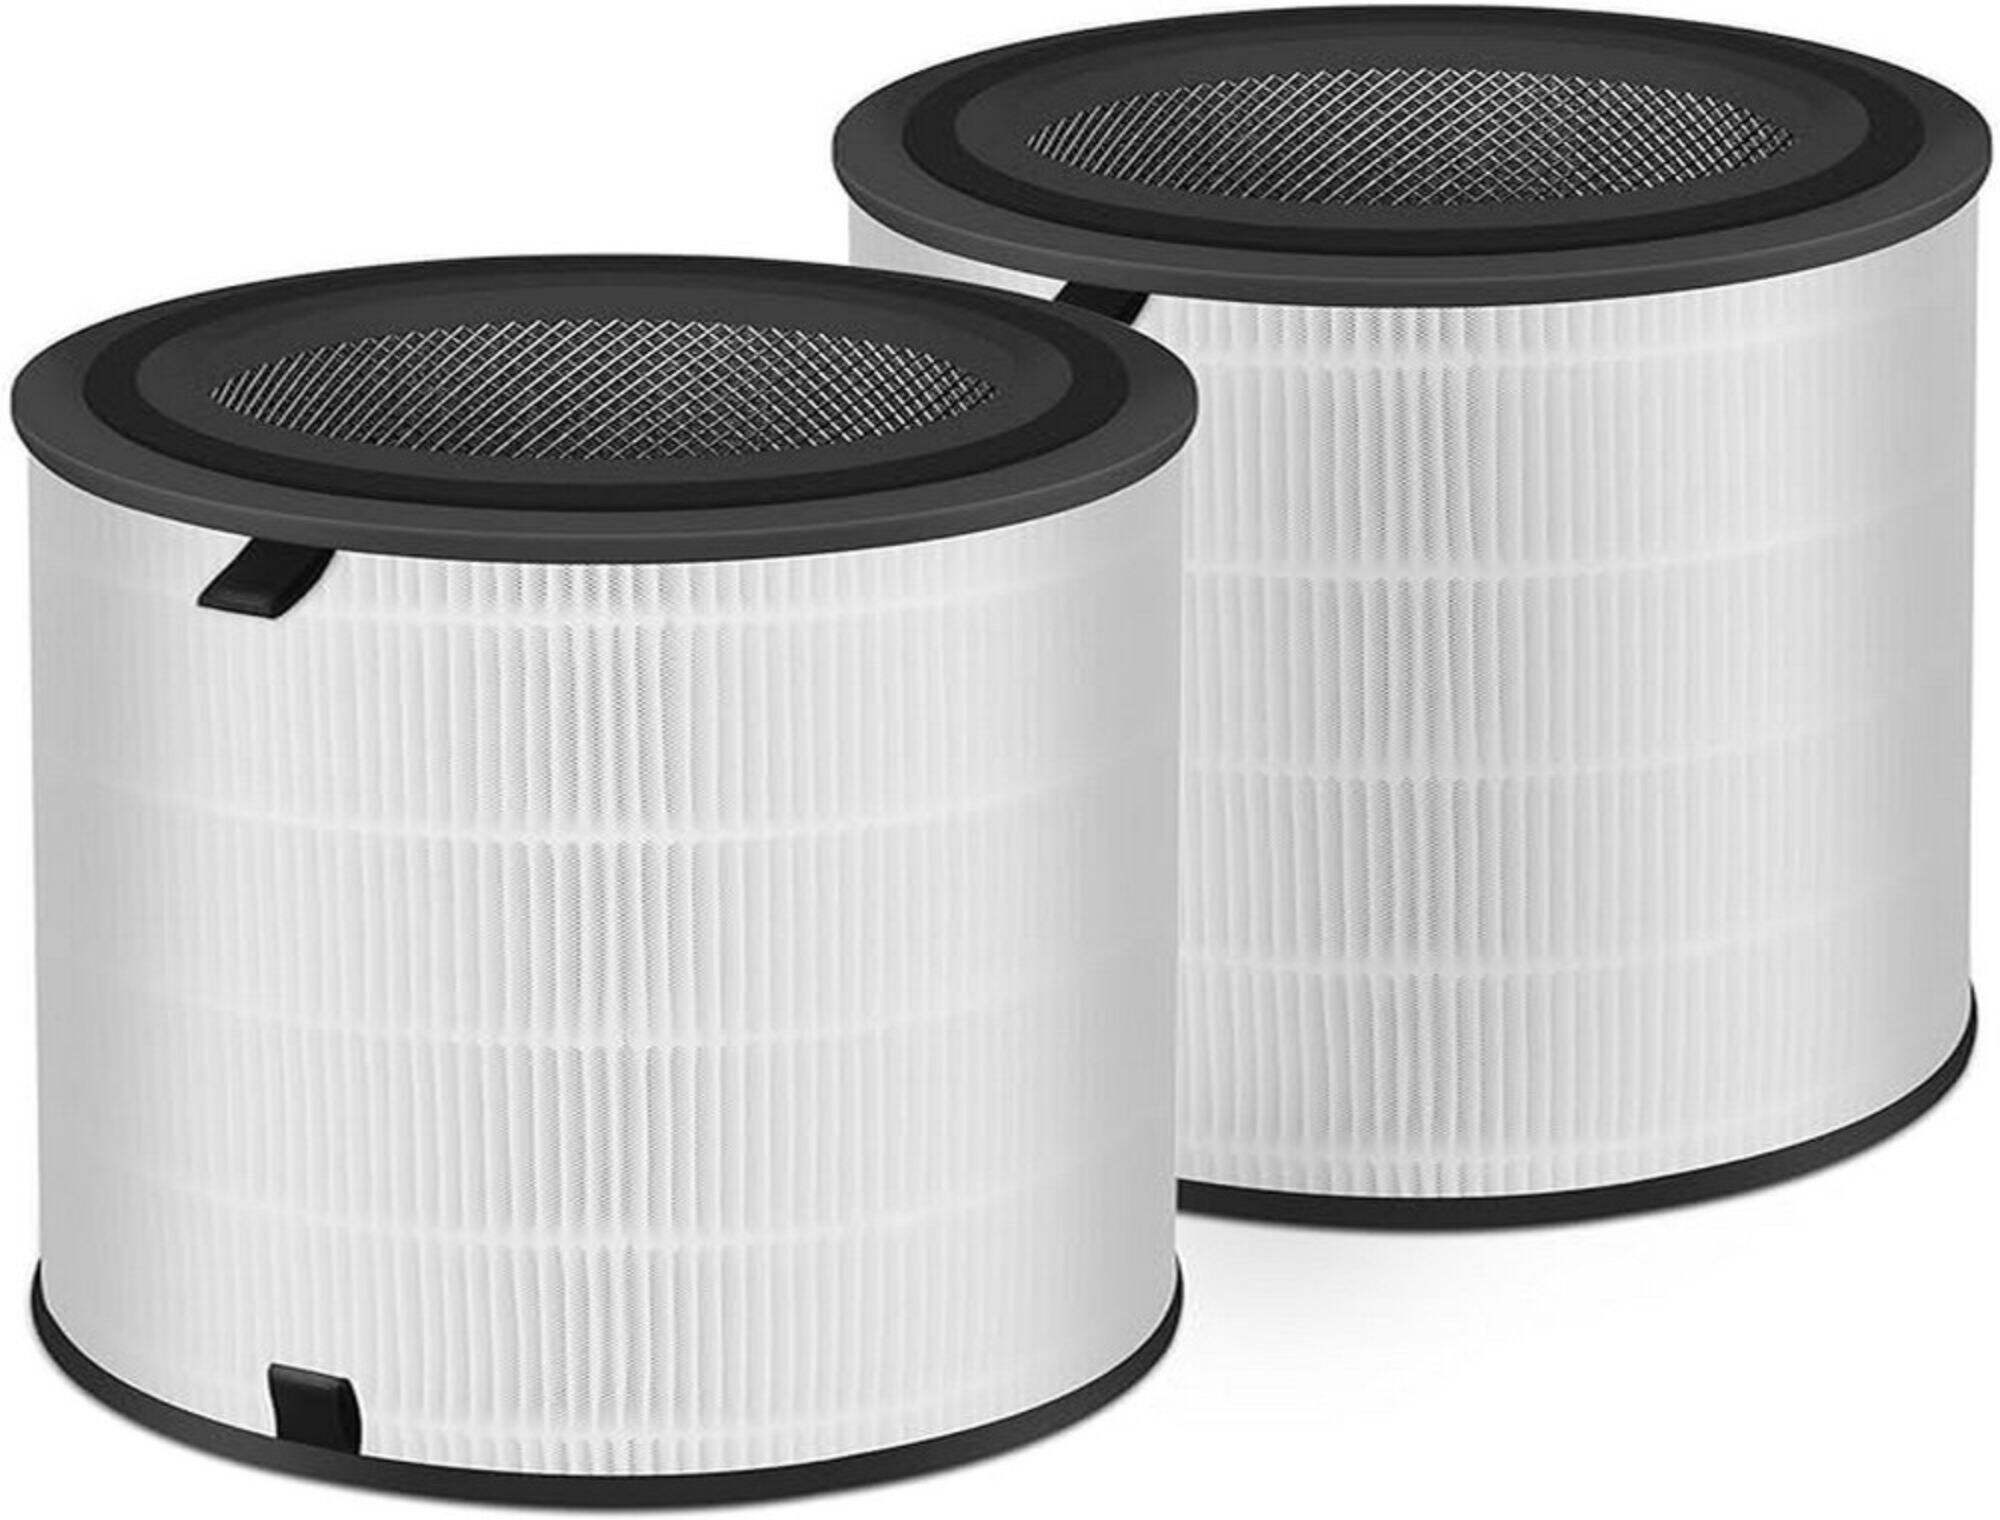 True HEPA Filter Replacements for Levoit LV-133-RF Air Purifiers